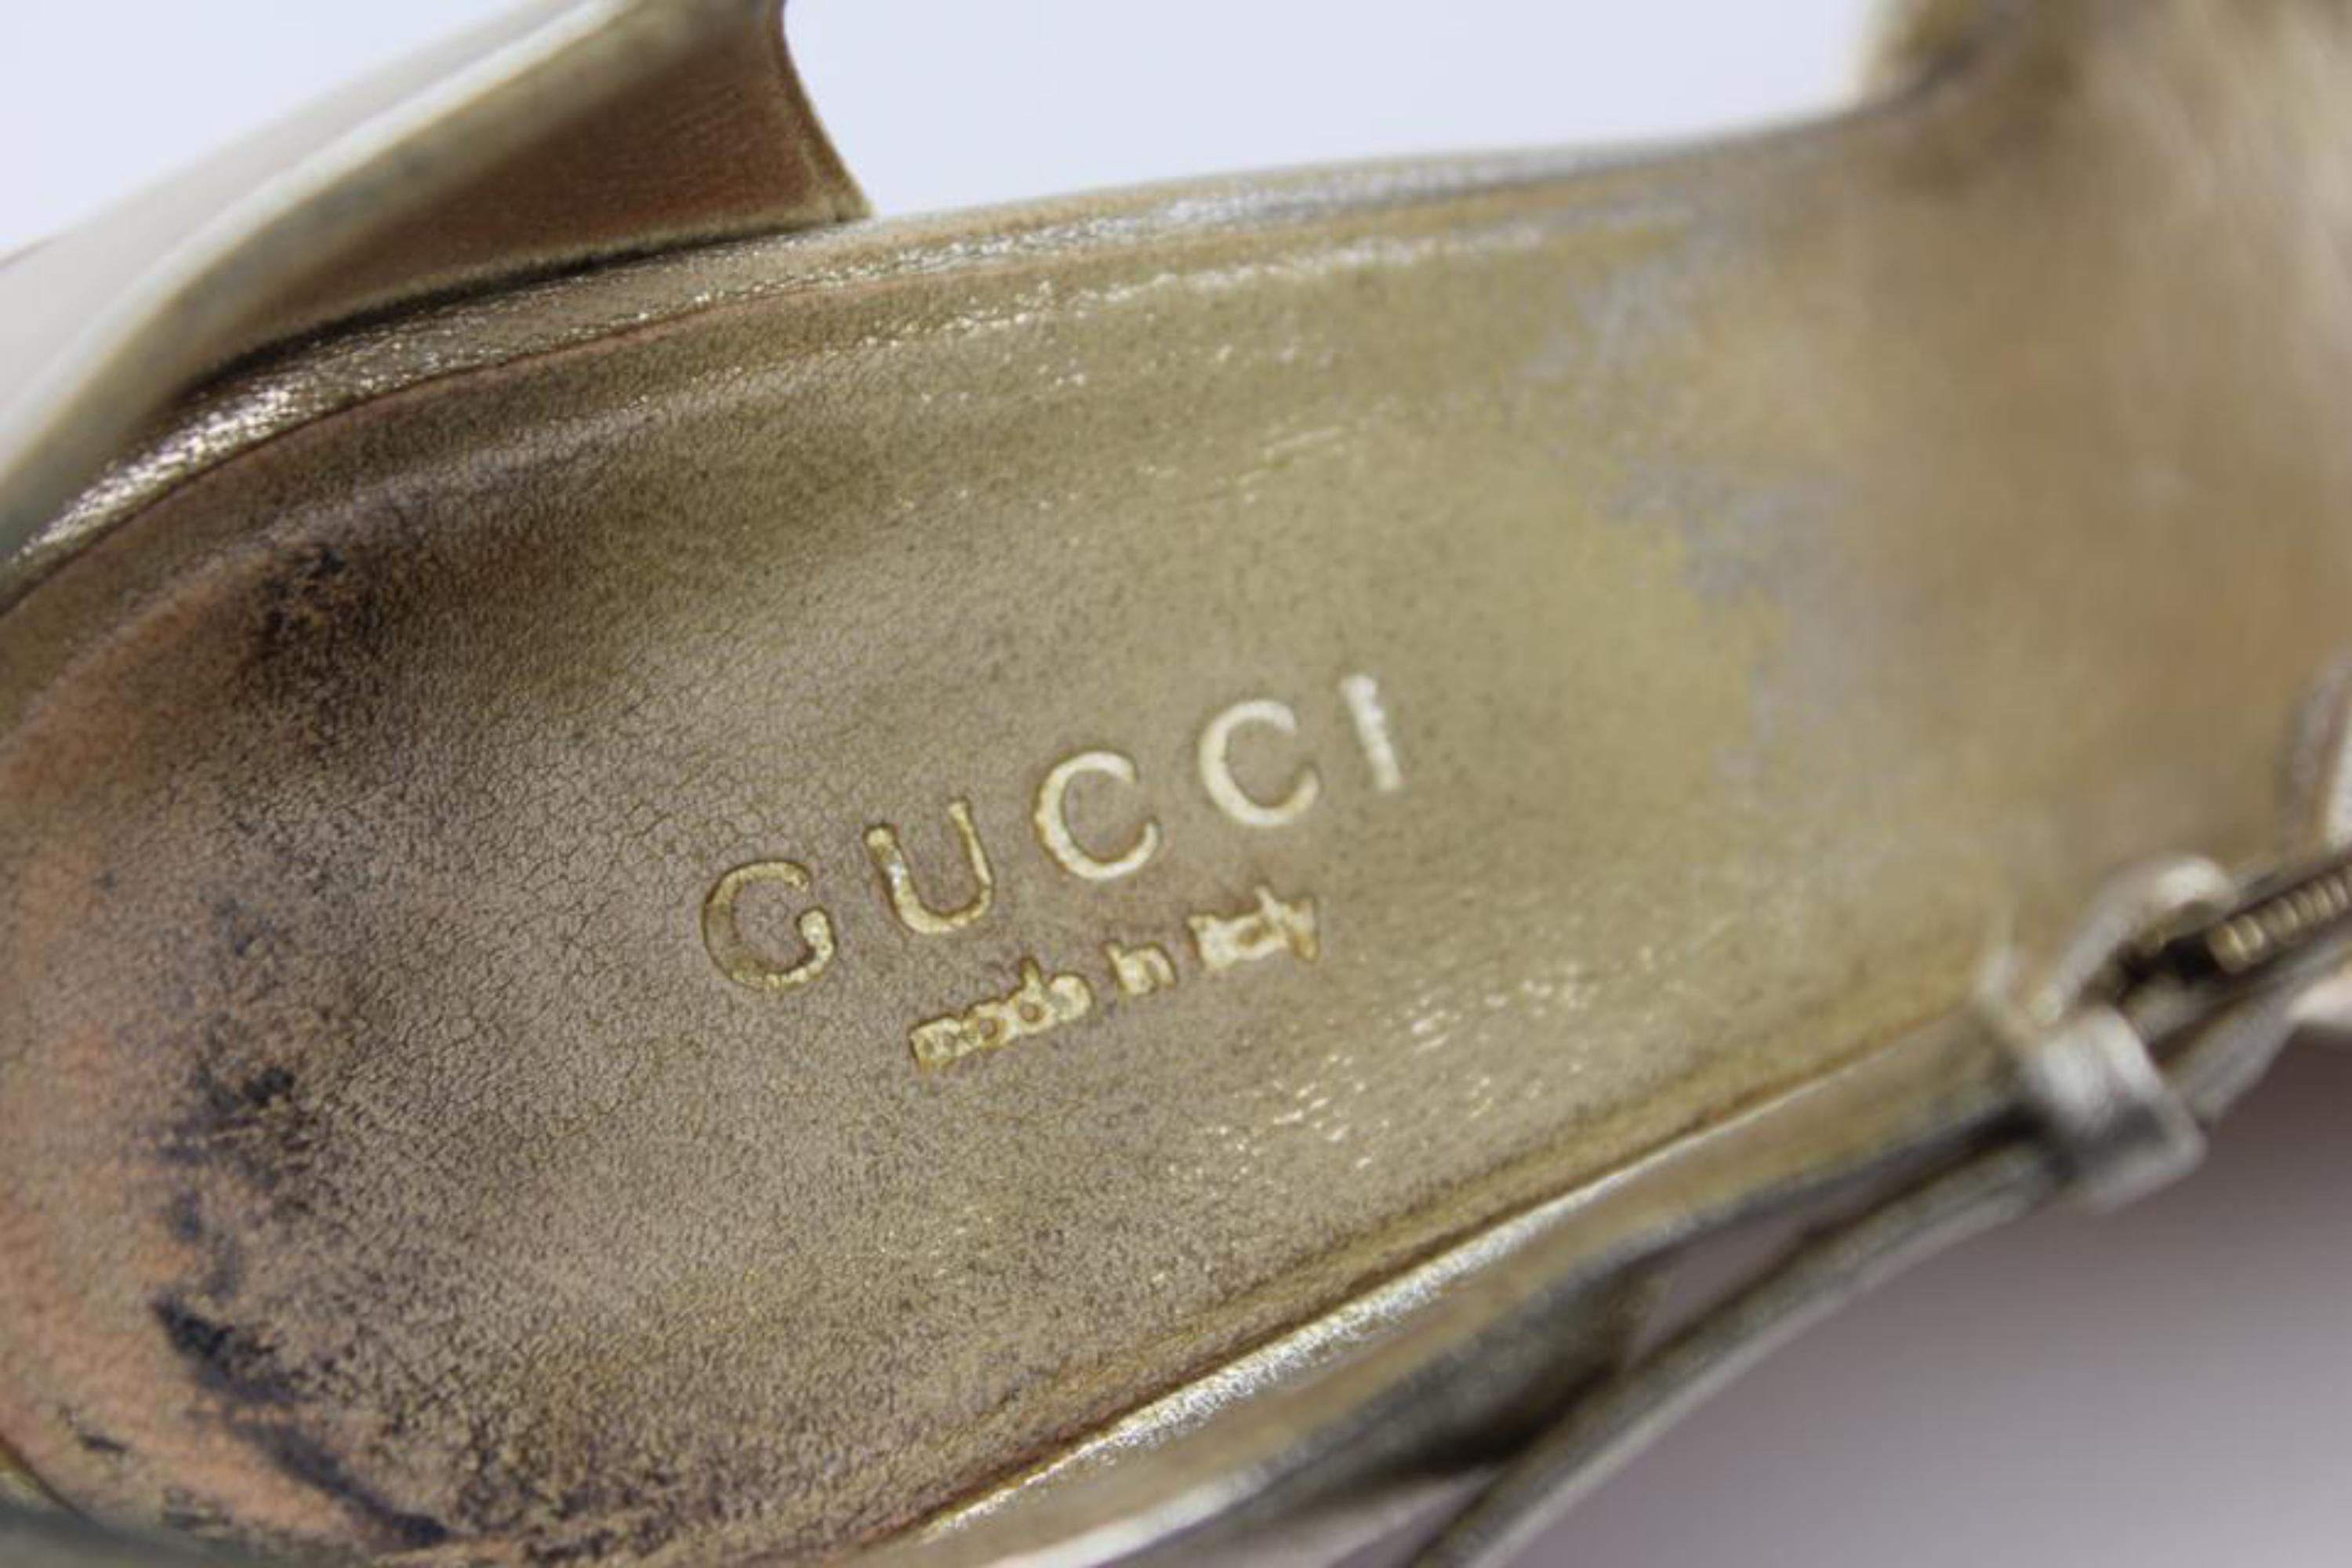 Gucci Gold Ggsl117 Pelle S Gomma Cork Sandals Wedges For Sale 5